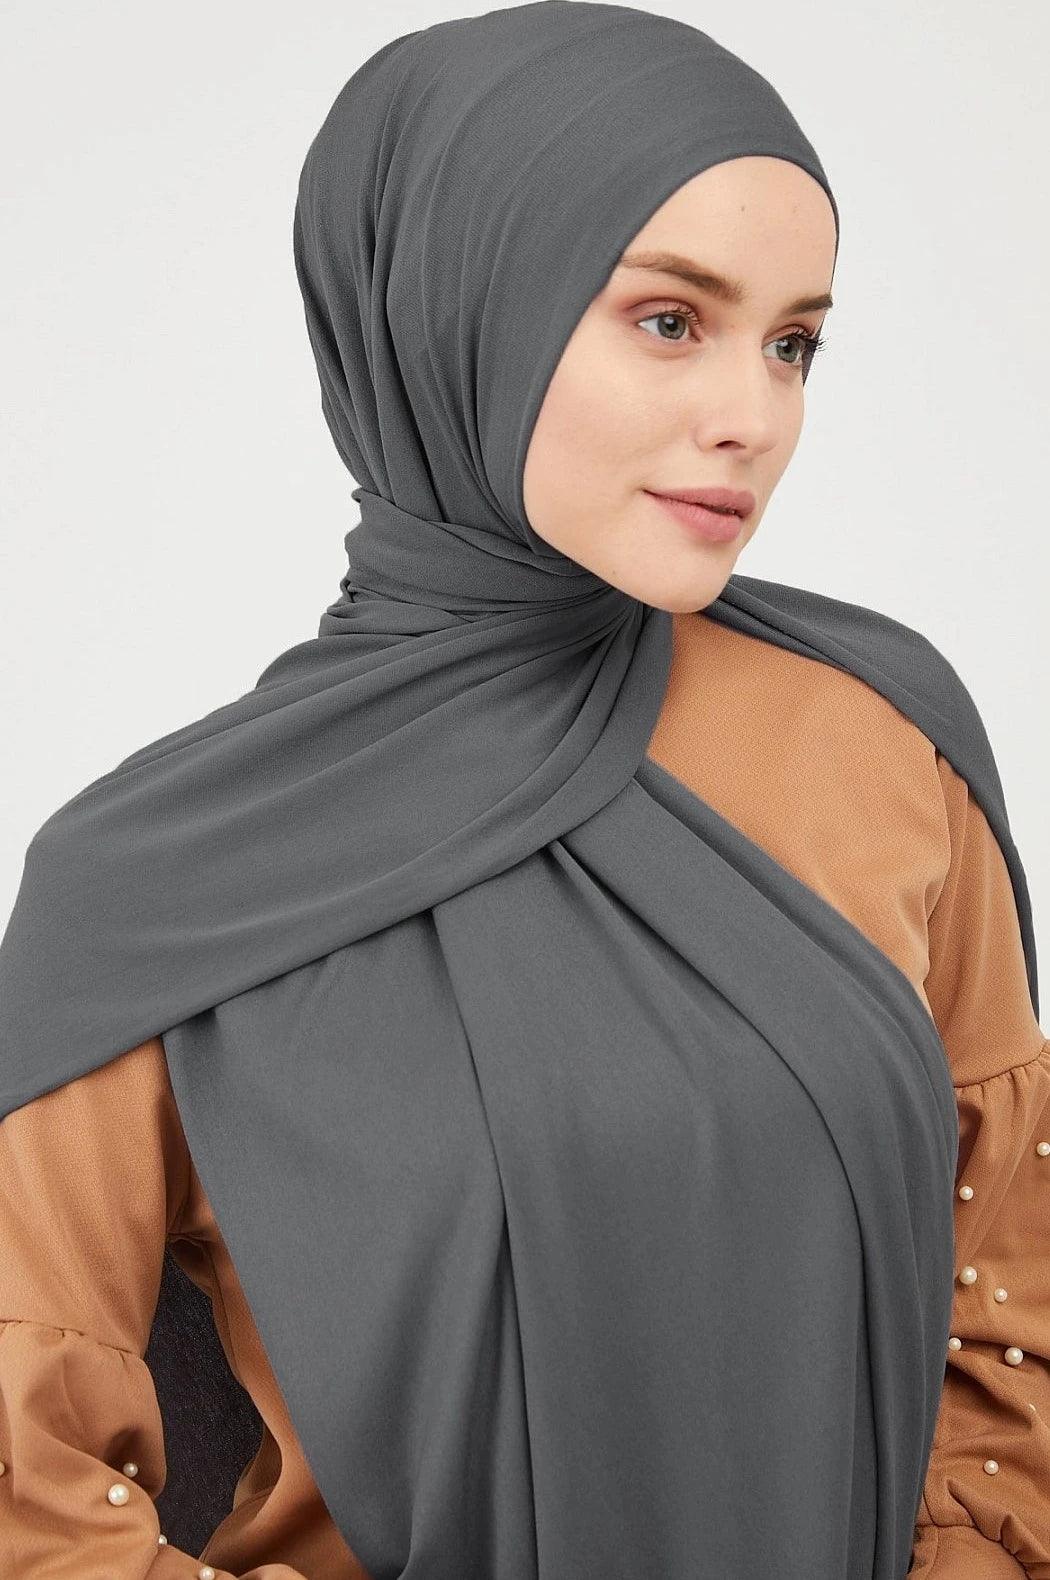 Cotton Combed Shawl Hijab Scarf - Anthracite Grey